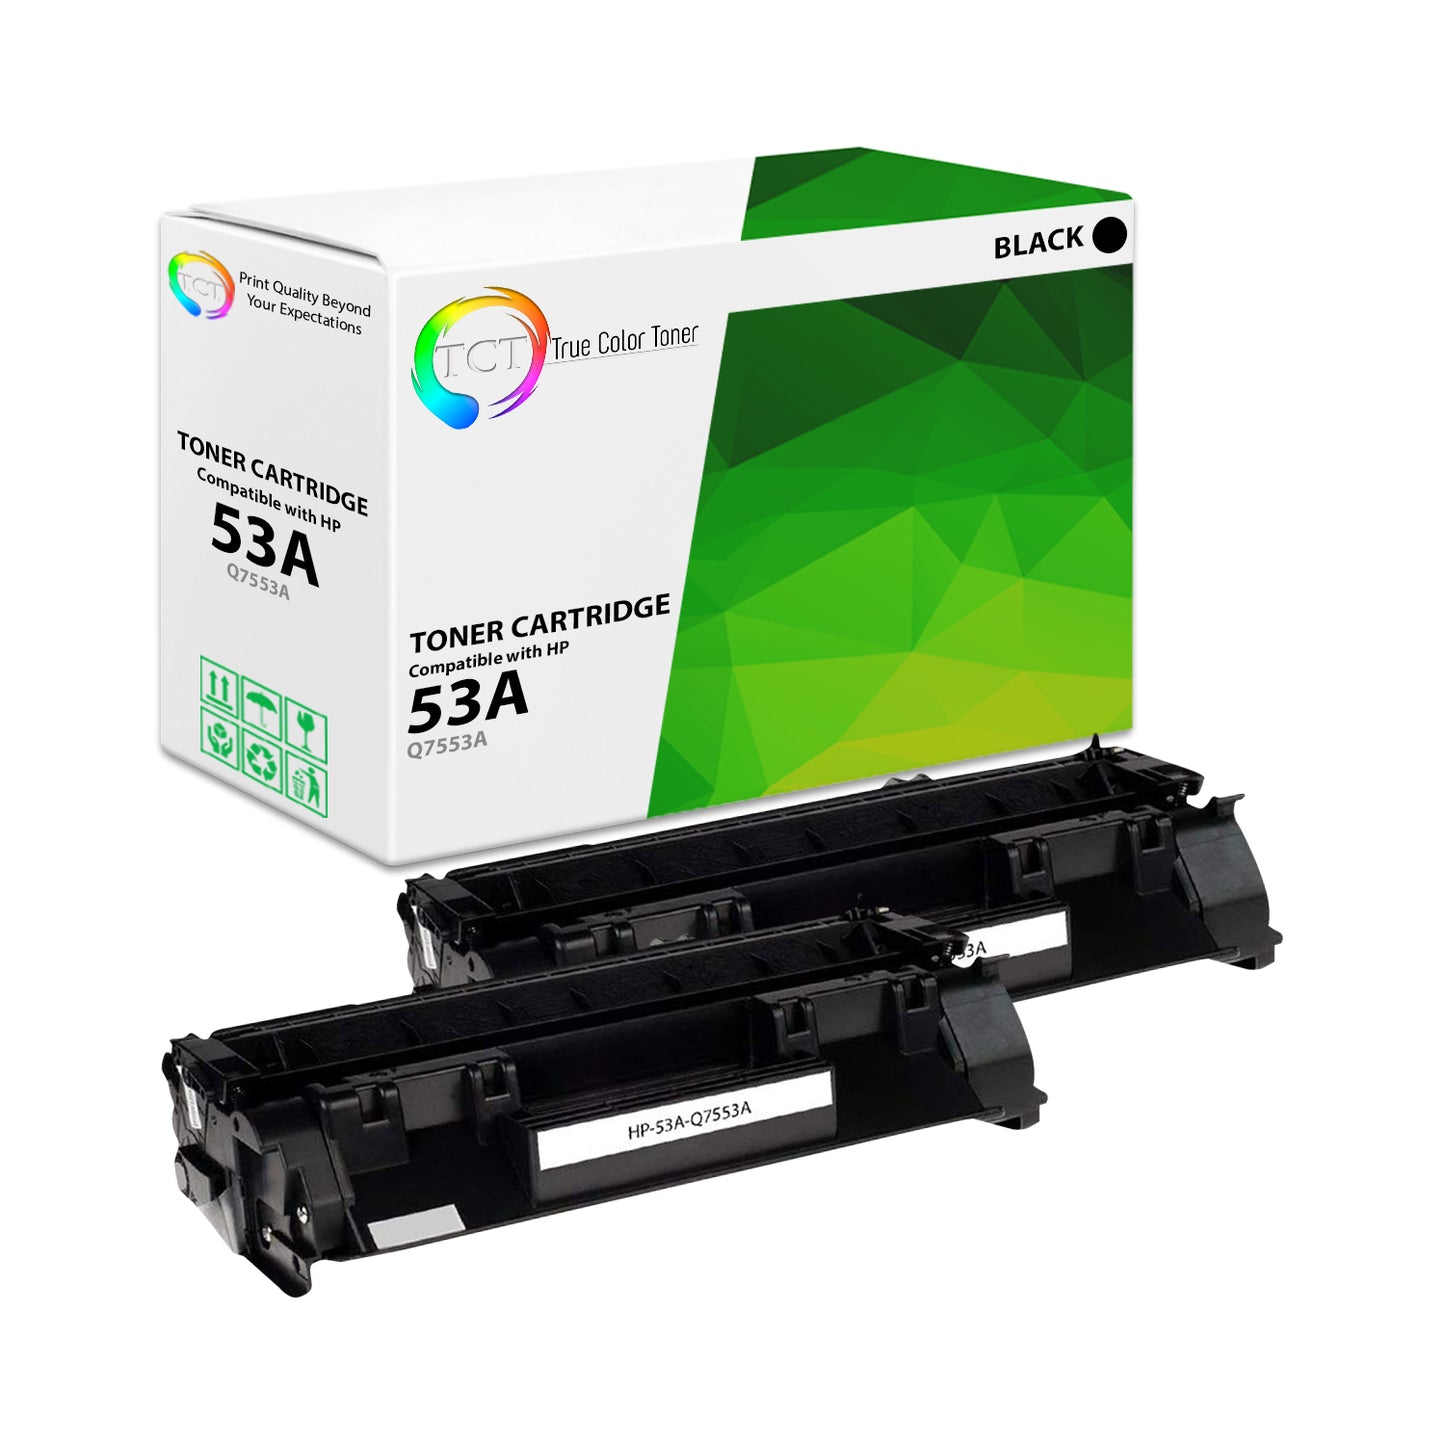 TCT Compatible Toner Cartridge Replacement for the HP 53A Series - 2 Pack Black